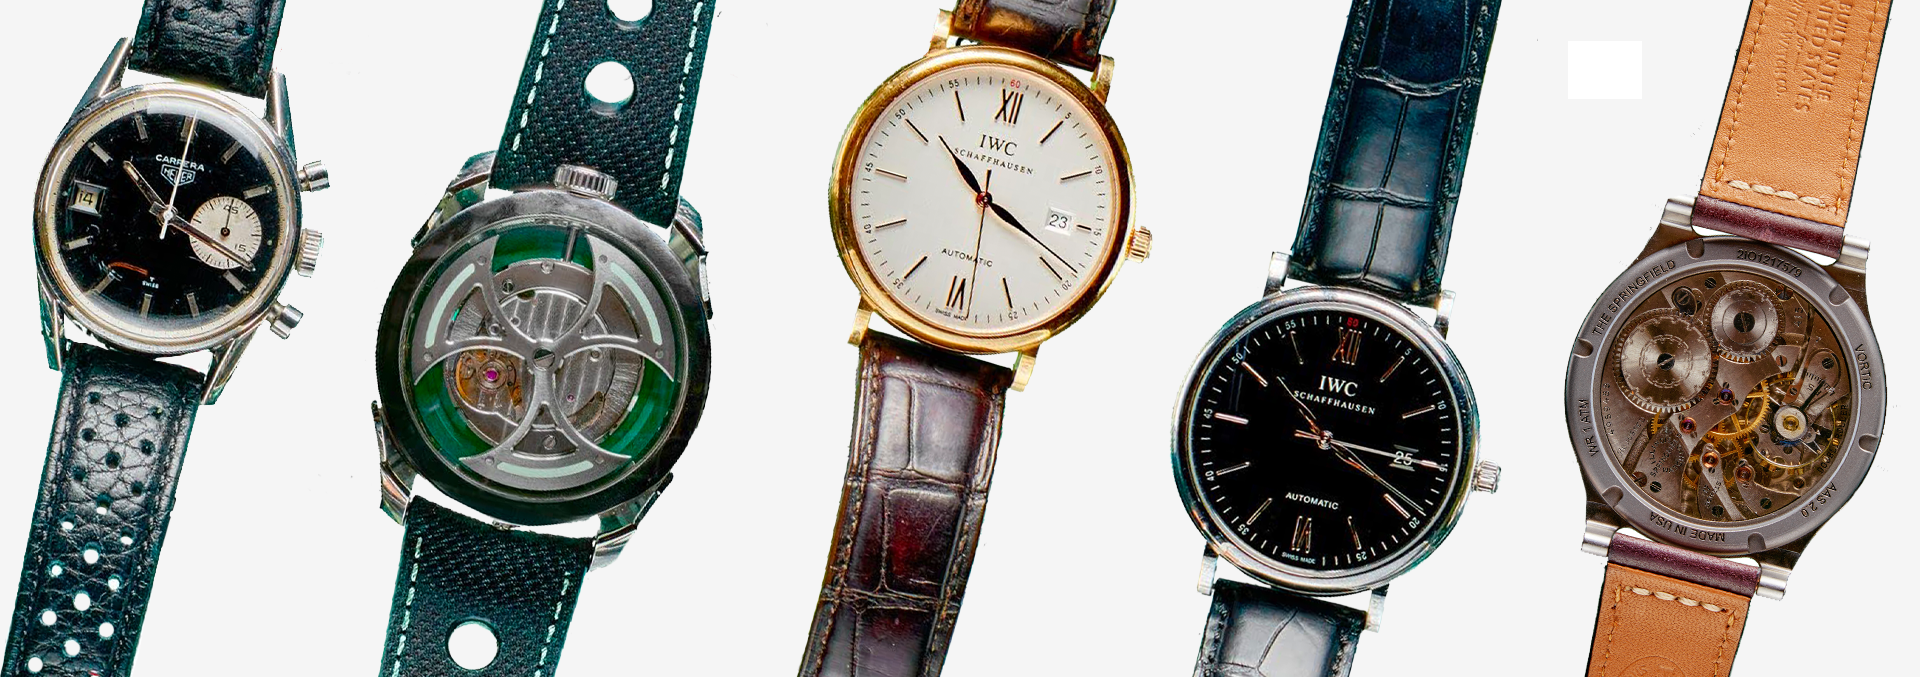 4 fine timepieces that will be in the Matter of Time auction